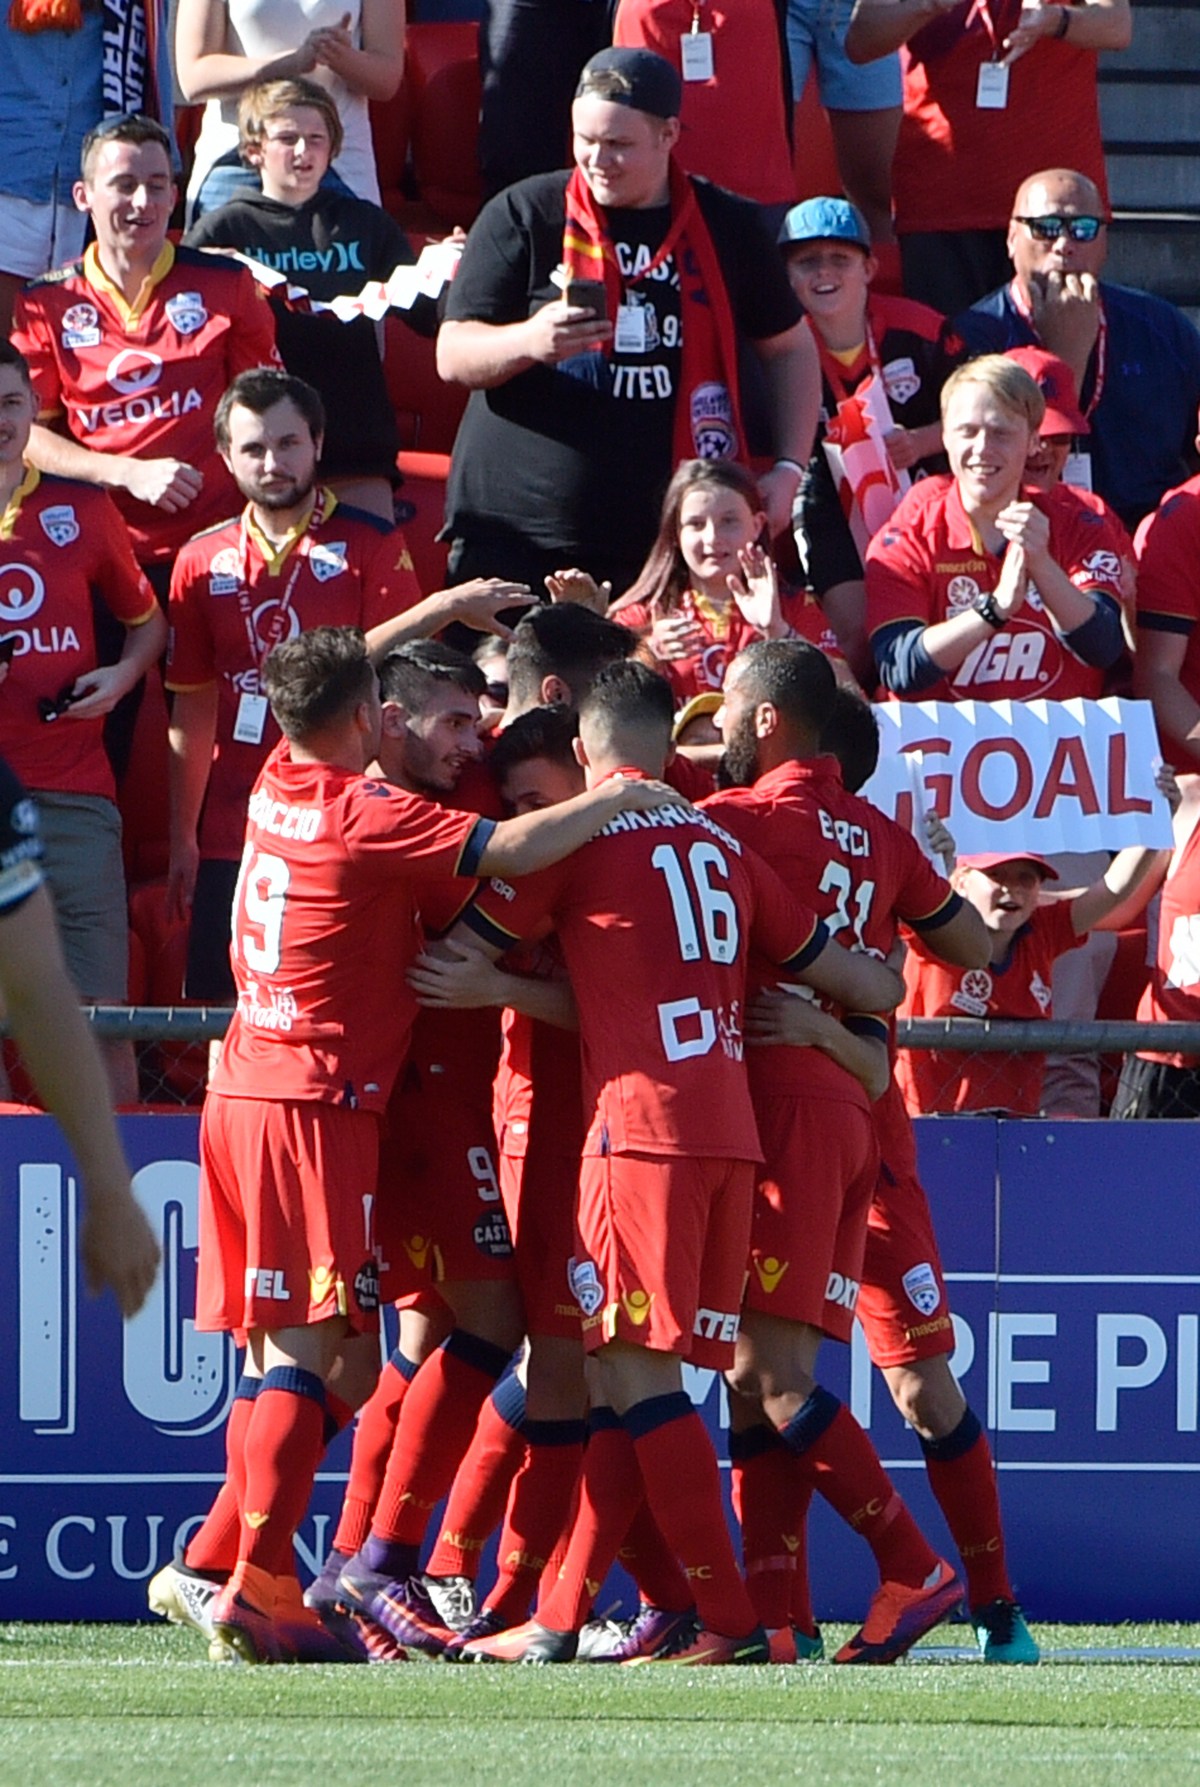 United players react after scoring penalty goal during the Round 5 A-League match between Adelaide United and the Central Coast Mariners at Cooper Stadium in Adelaide, Sunday, Nov. 6, 2016. (AAP Image/David Mariuz) NO ARCHIVING, EDITORIAL USE ONLY